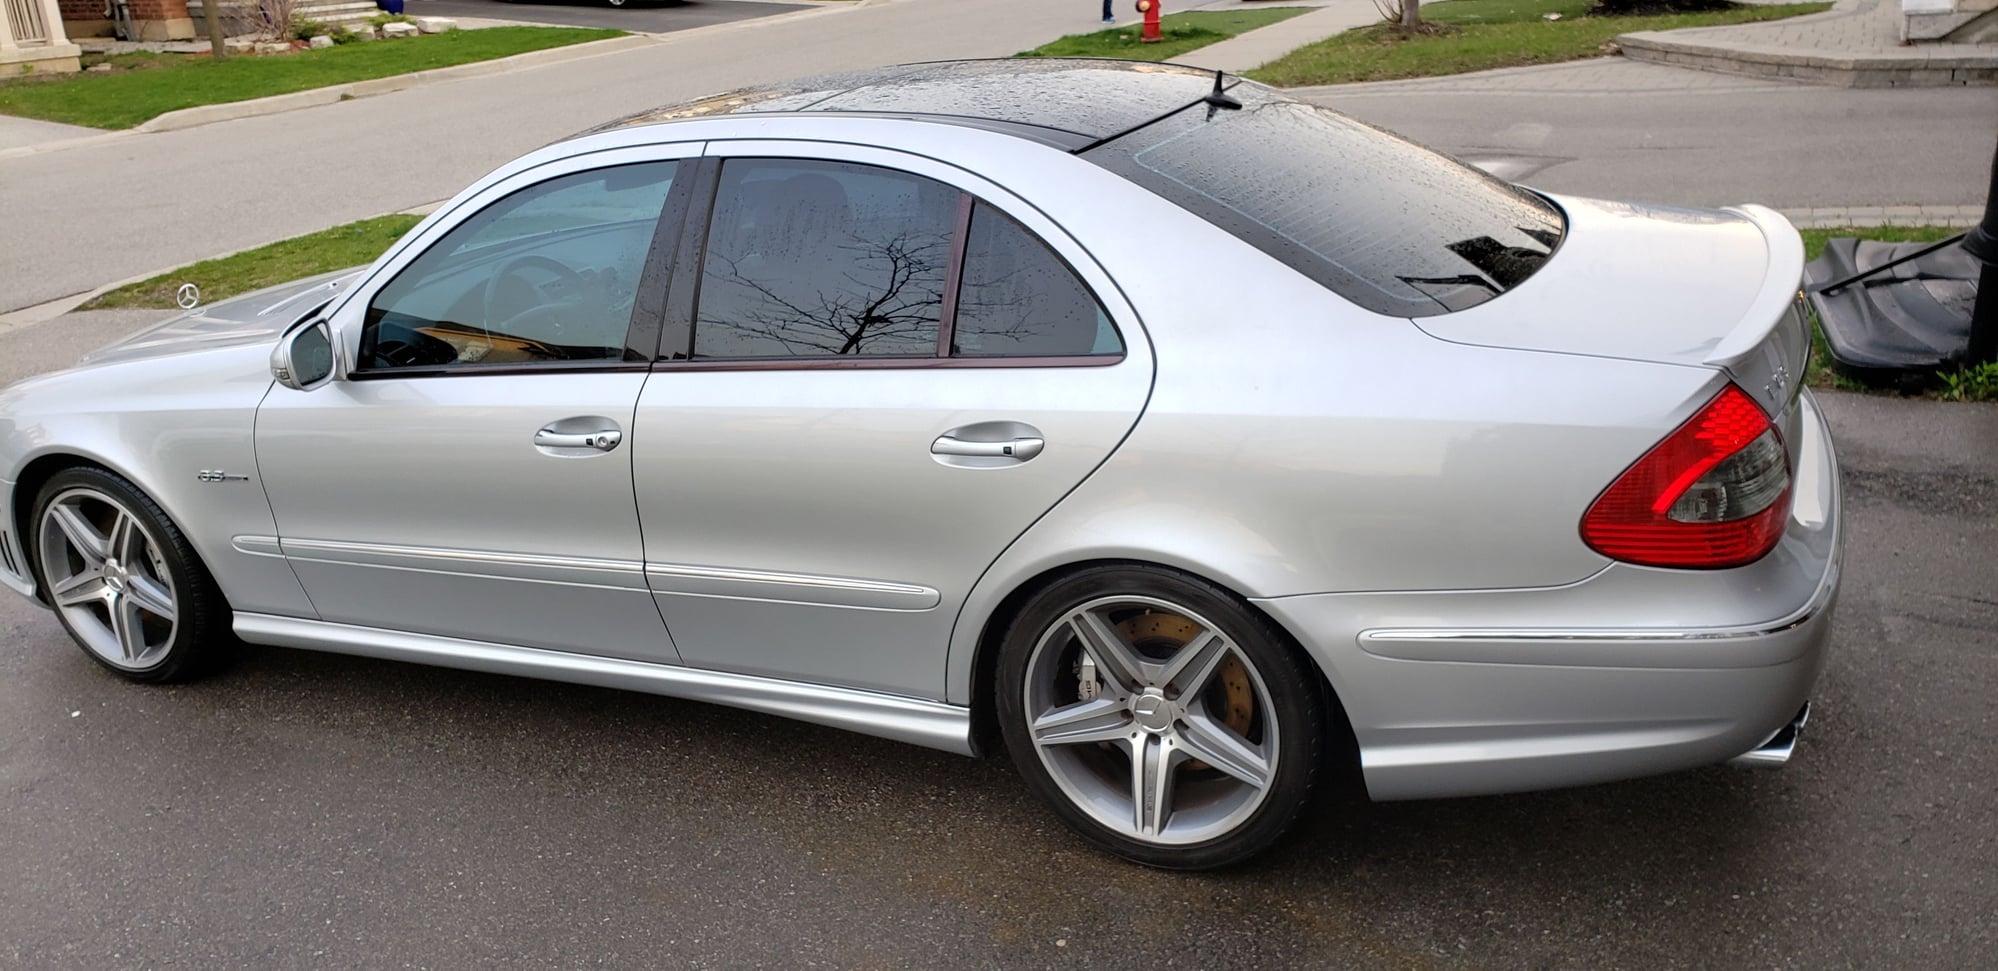 2007 Mercedes-Benz E63 AMG - 2007 E63 Amg 507HP - Used - VIN WDBUF77X57BO81568 - 135,500 Miles - 8 cyl - 2WD - Automatic - Sedan - Silver - Oakville, ON L6M0K1, Canada